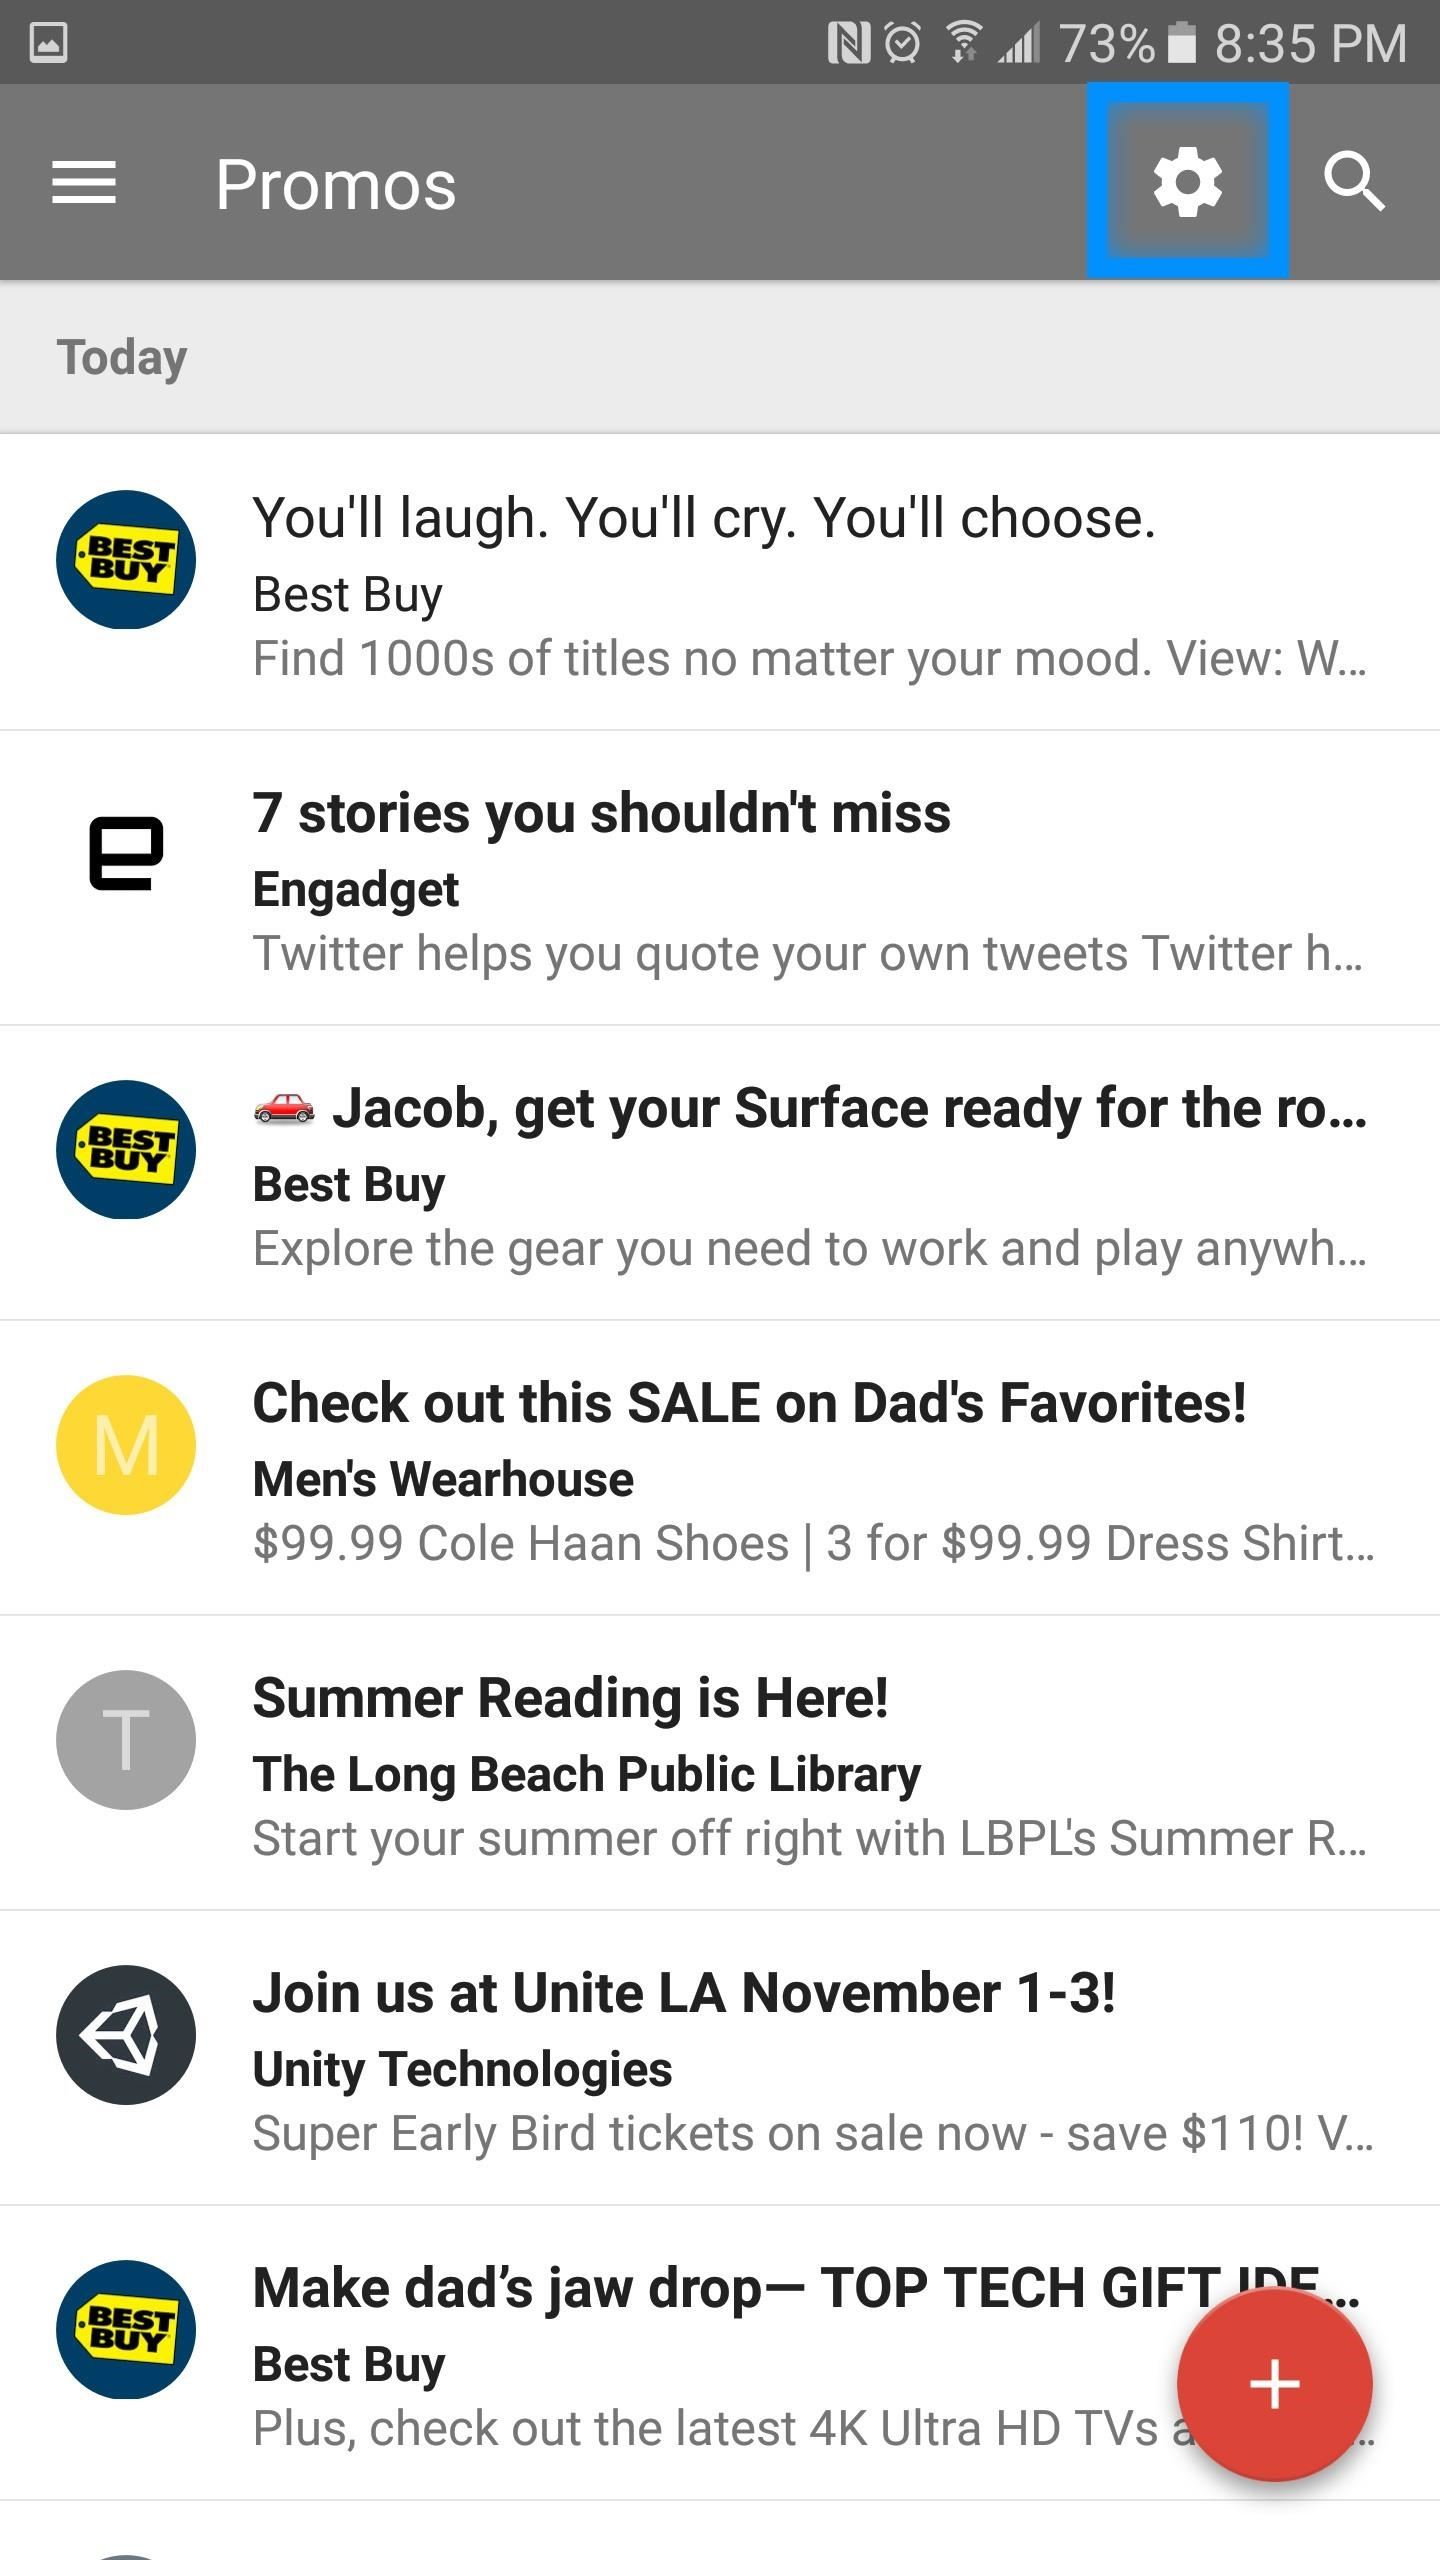 10 Reasons You Need to Switch to Google Inbox